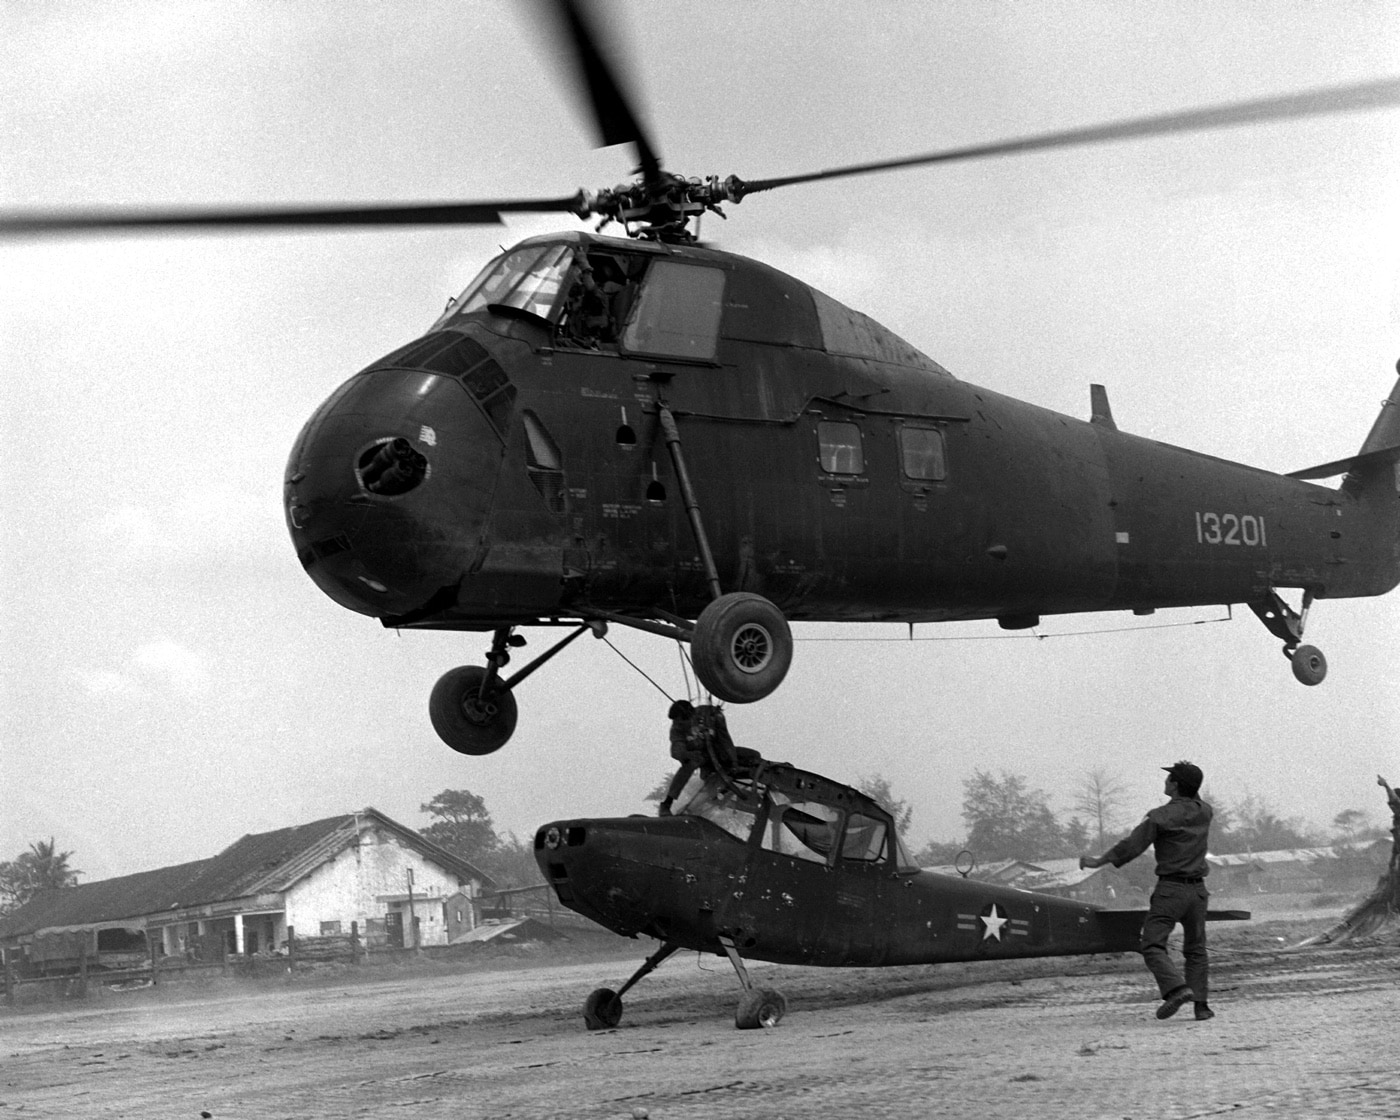 In this photo a Republic of Vietnam Air Force H-34 Choctaw lifts a damaged O-1 Birddog from the tarmac at Da Nang Air Base. The O-1 was a fixed wing observation airplane used for artillery spotting and guiding airstrikes against the enemy NVA and VC forces. Like the Choctaw, it was a tail dragger and piston powered.